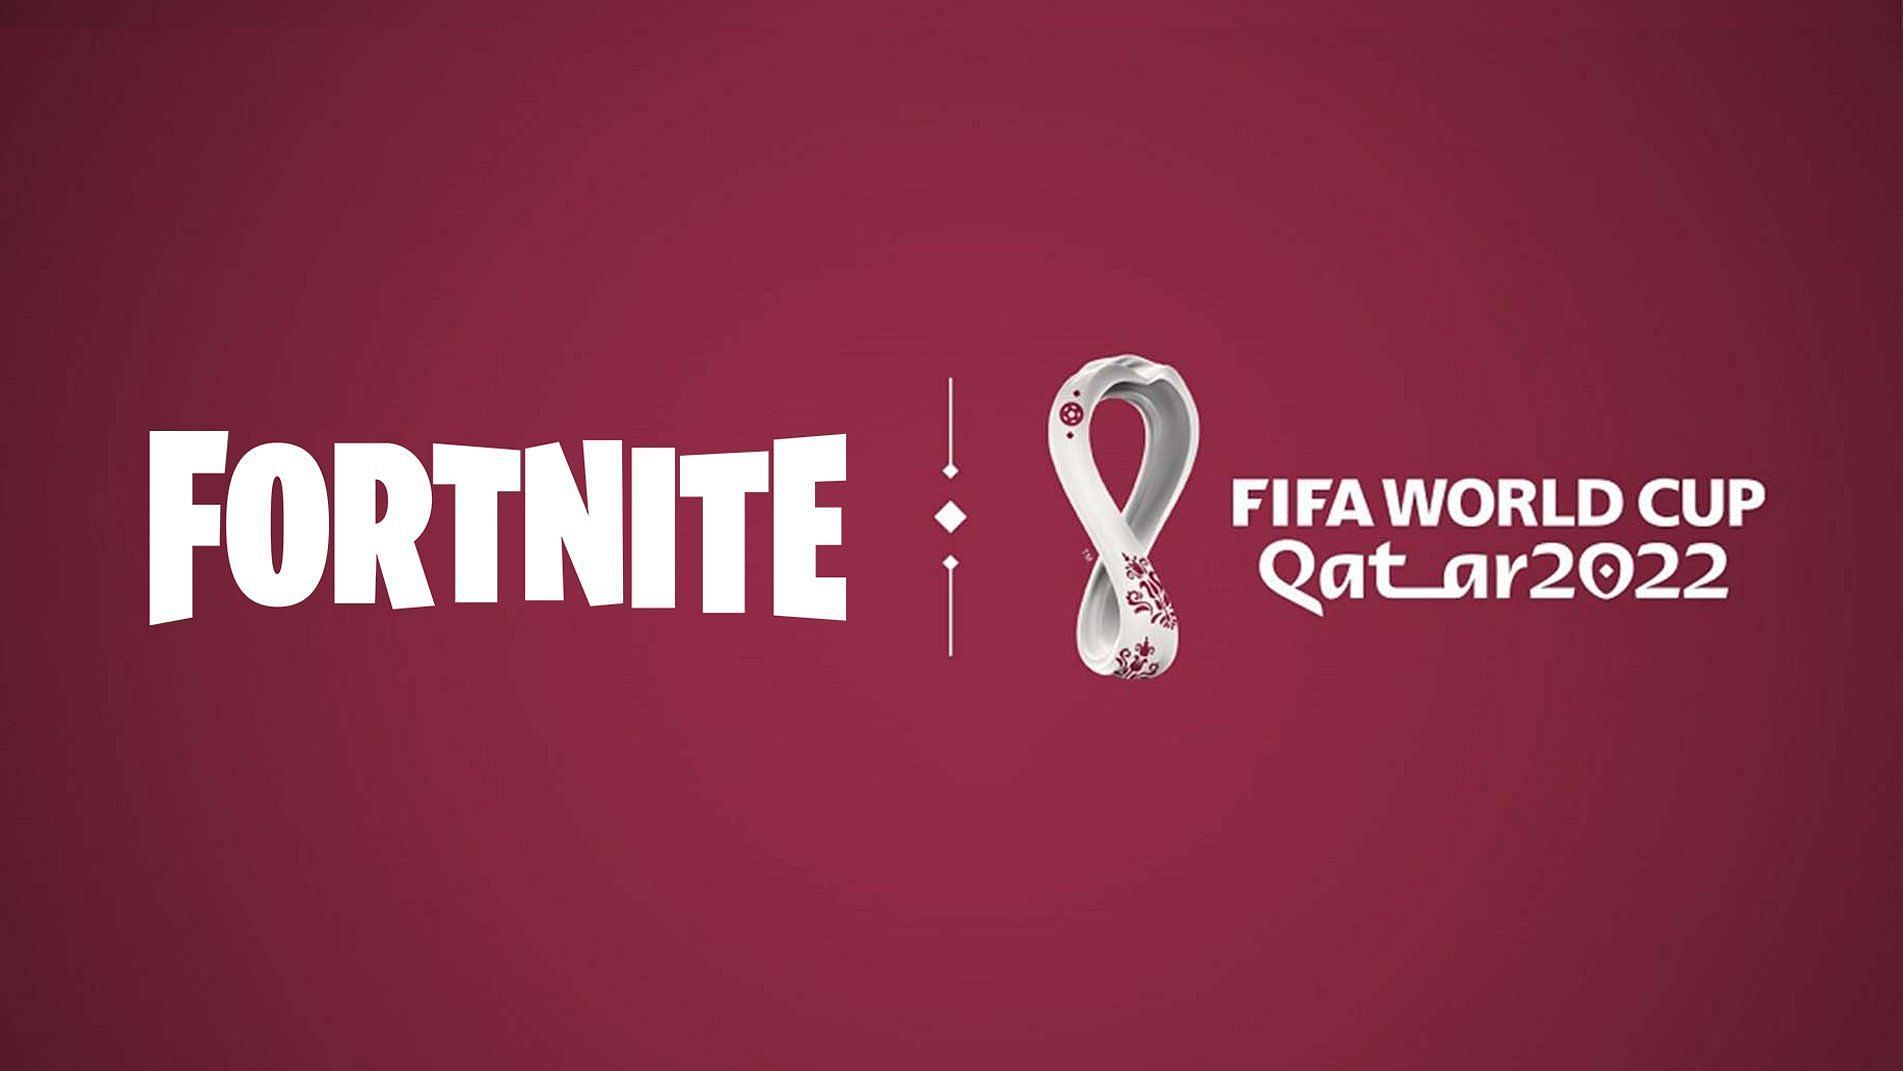 Fortnite x FIFA World Cup collab details leaked